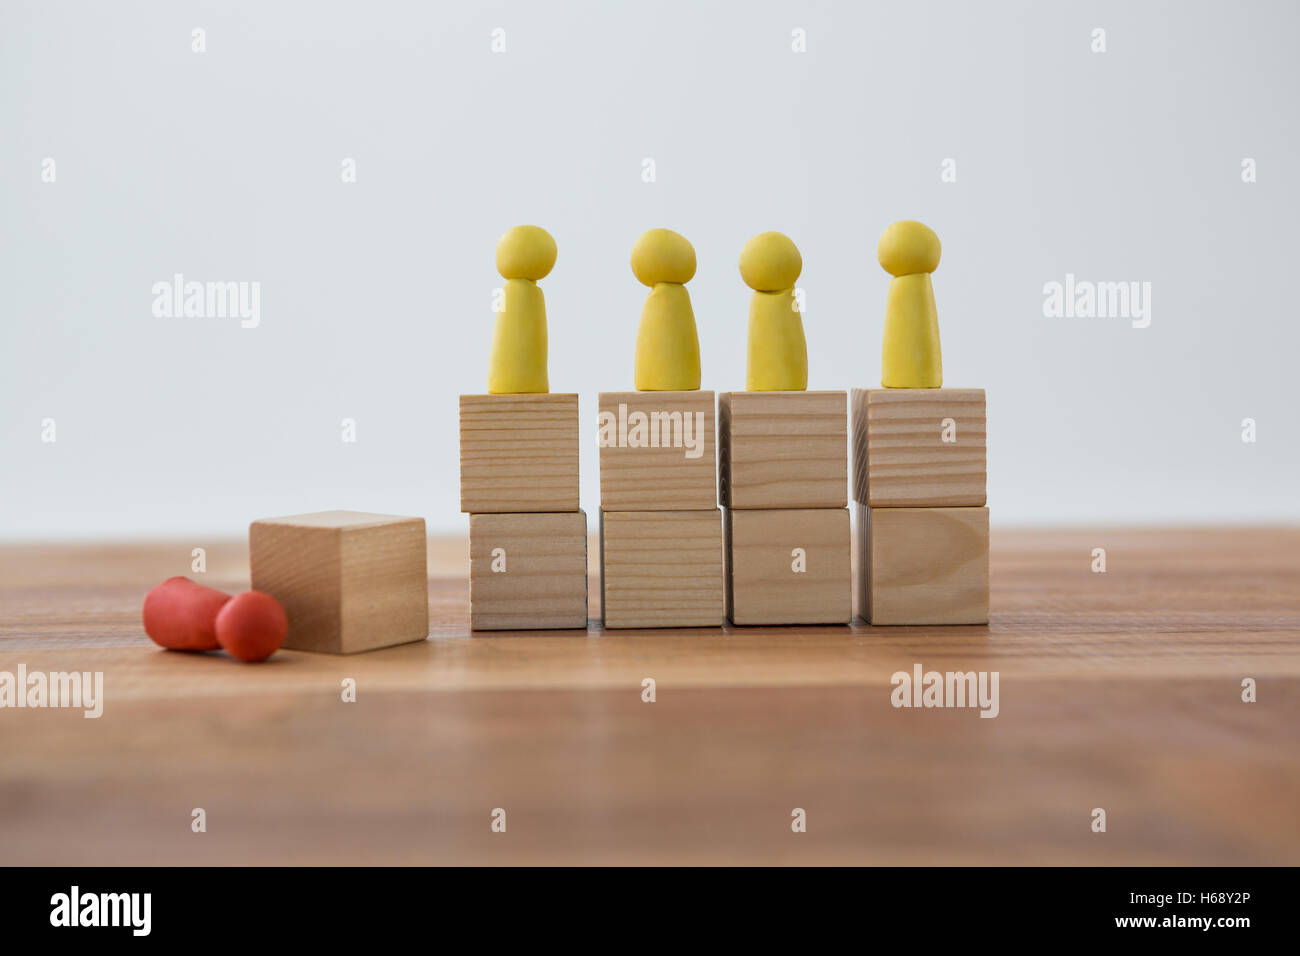 Yellow Figurines on wooden blocks in a row and red figurine fallen on ground Stock Photo